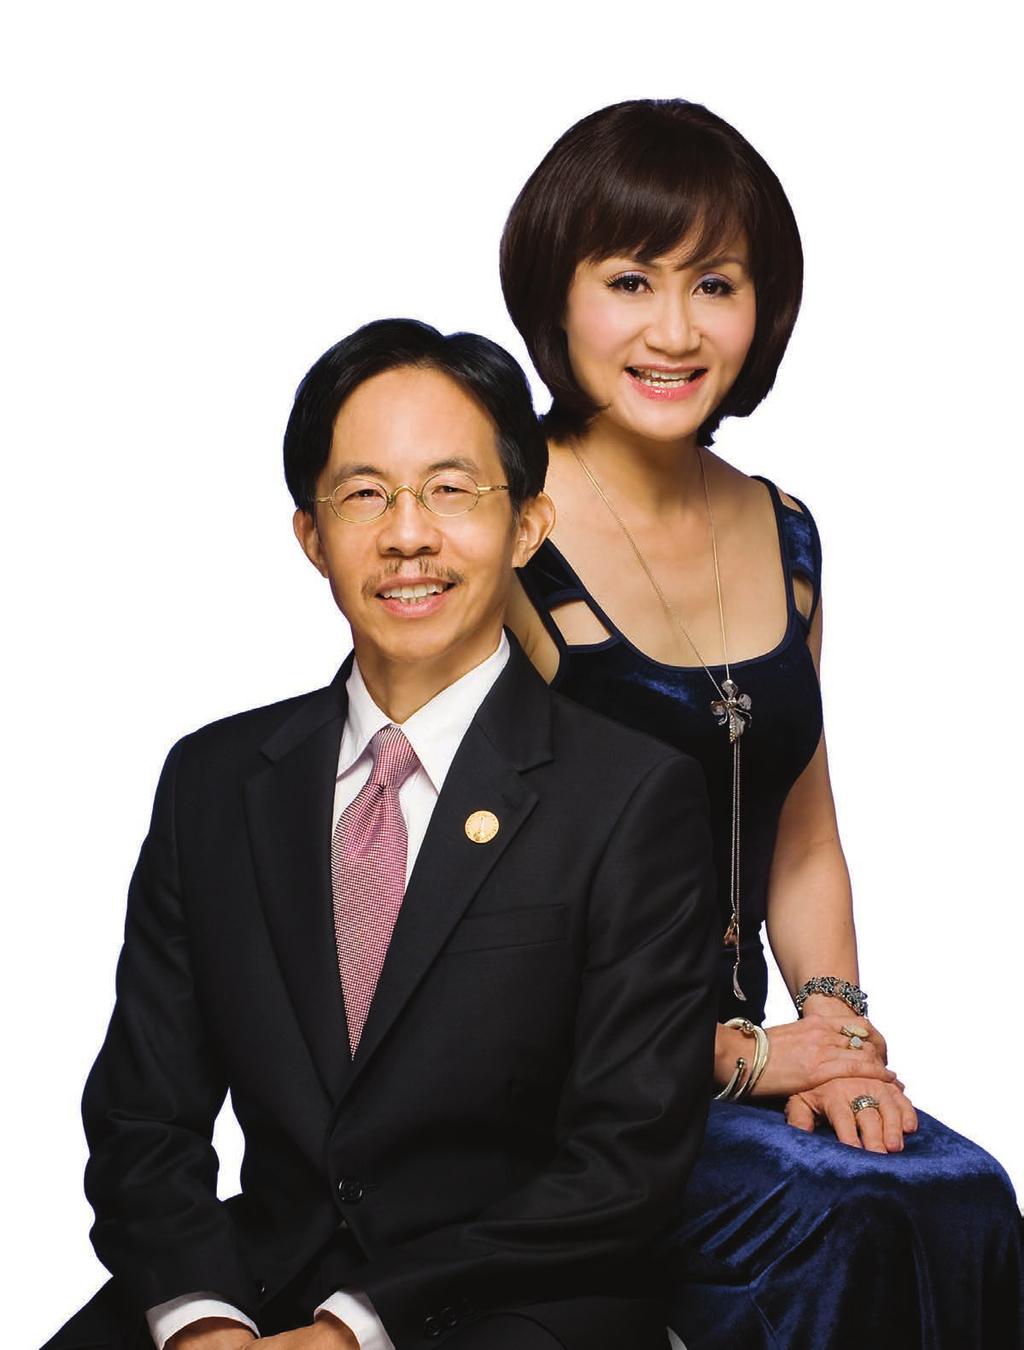 9 8 7 W Year Team Elite JC WEALTH MANAGEMENT PTE LTD - JACKIE & JAMES CHIA 七届寰宇领袖黄长虹与谢撝谦 hat immediately attracted Jackie and James to this direct selling company was its ability to create leveraged